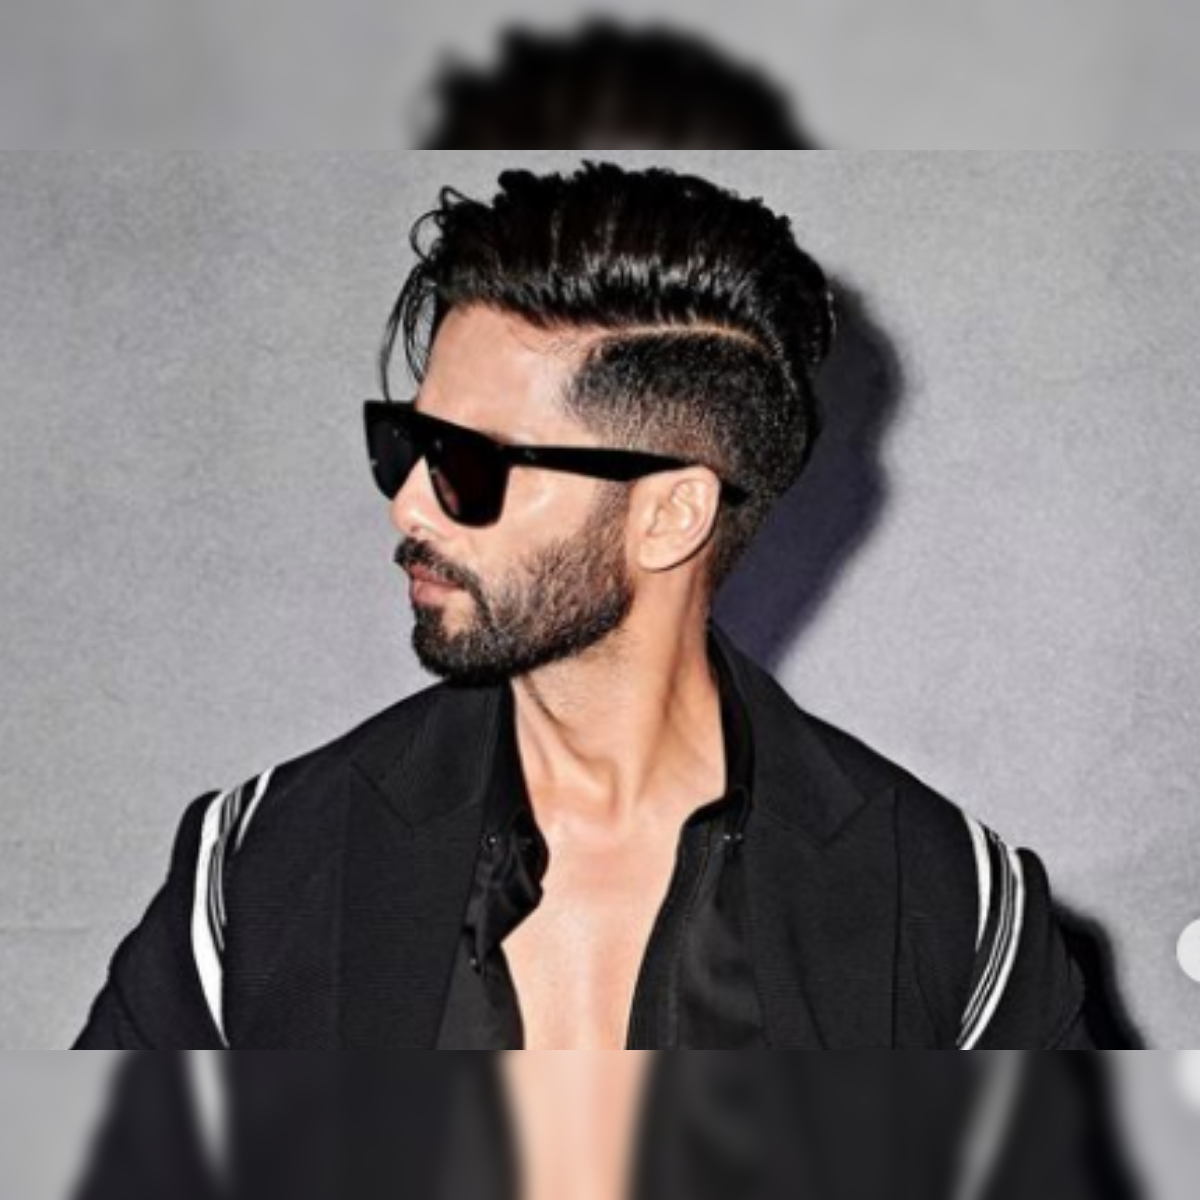 Shahid Kapoor opens up about following Radha Soami faith: 'I was very lost,  couldn't make sense of anything' | Bollywood News - The Indian Express